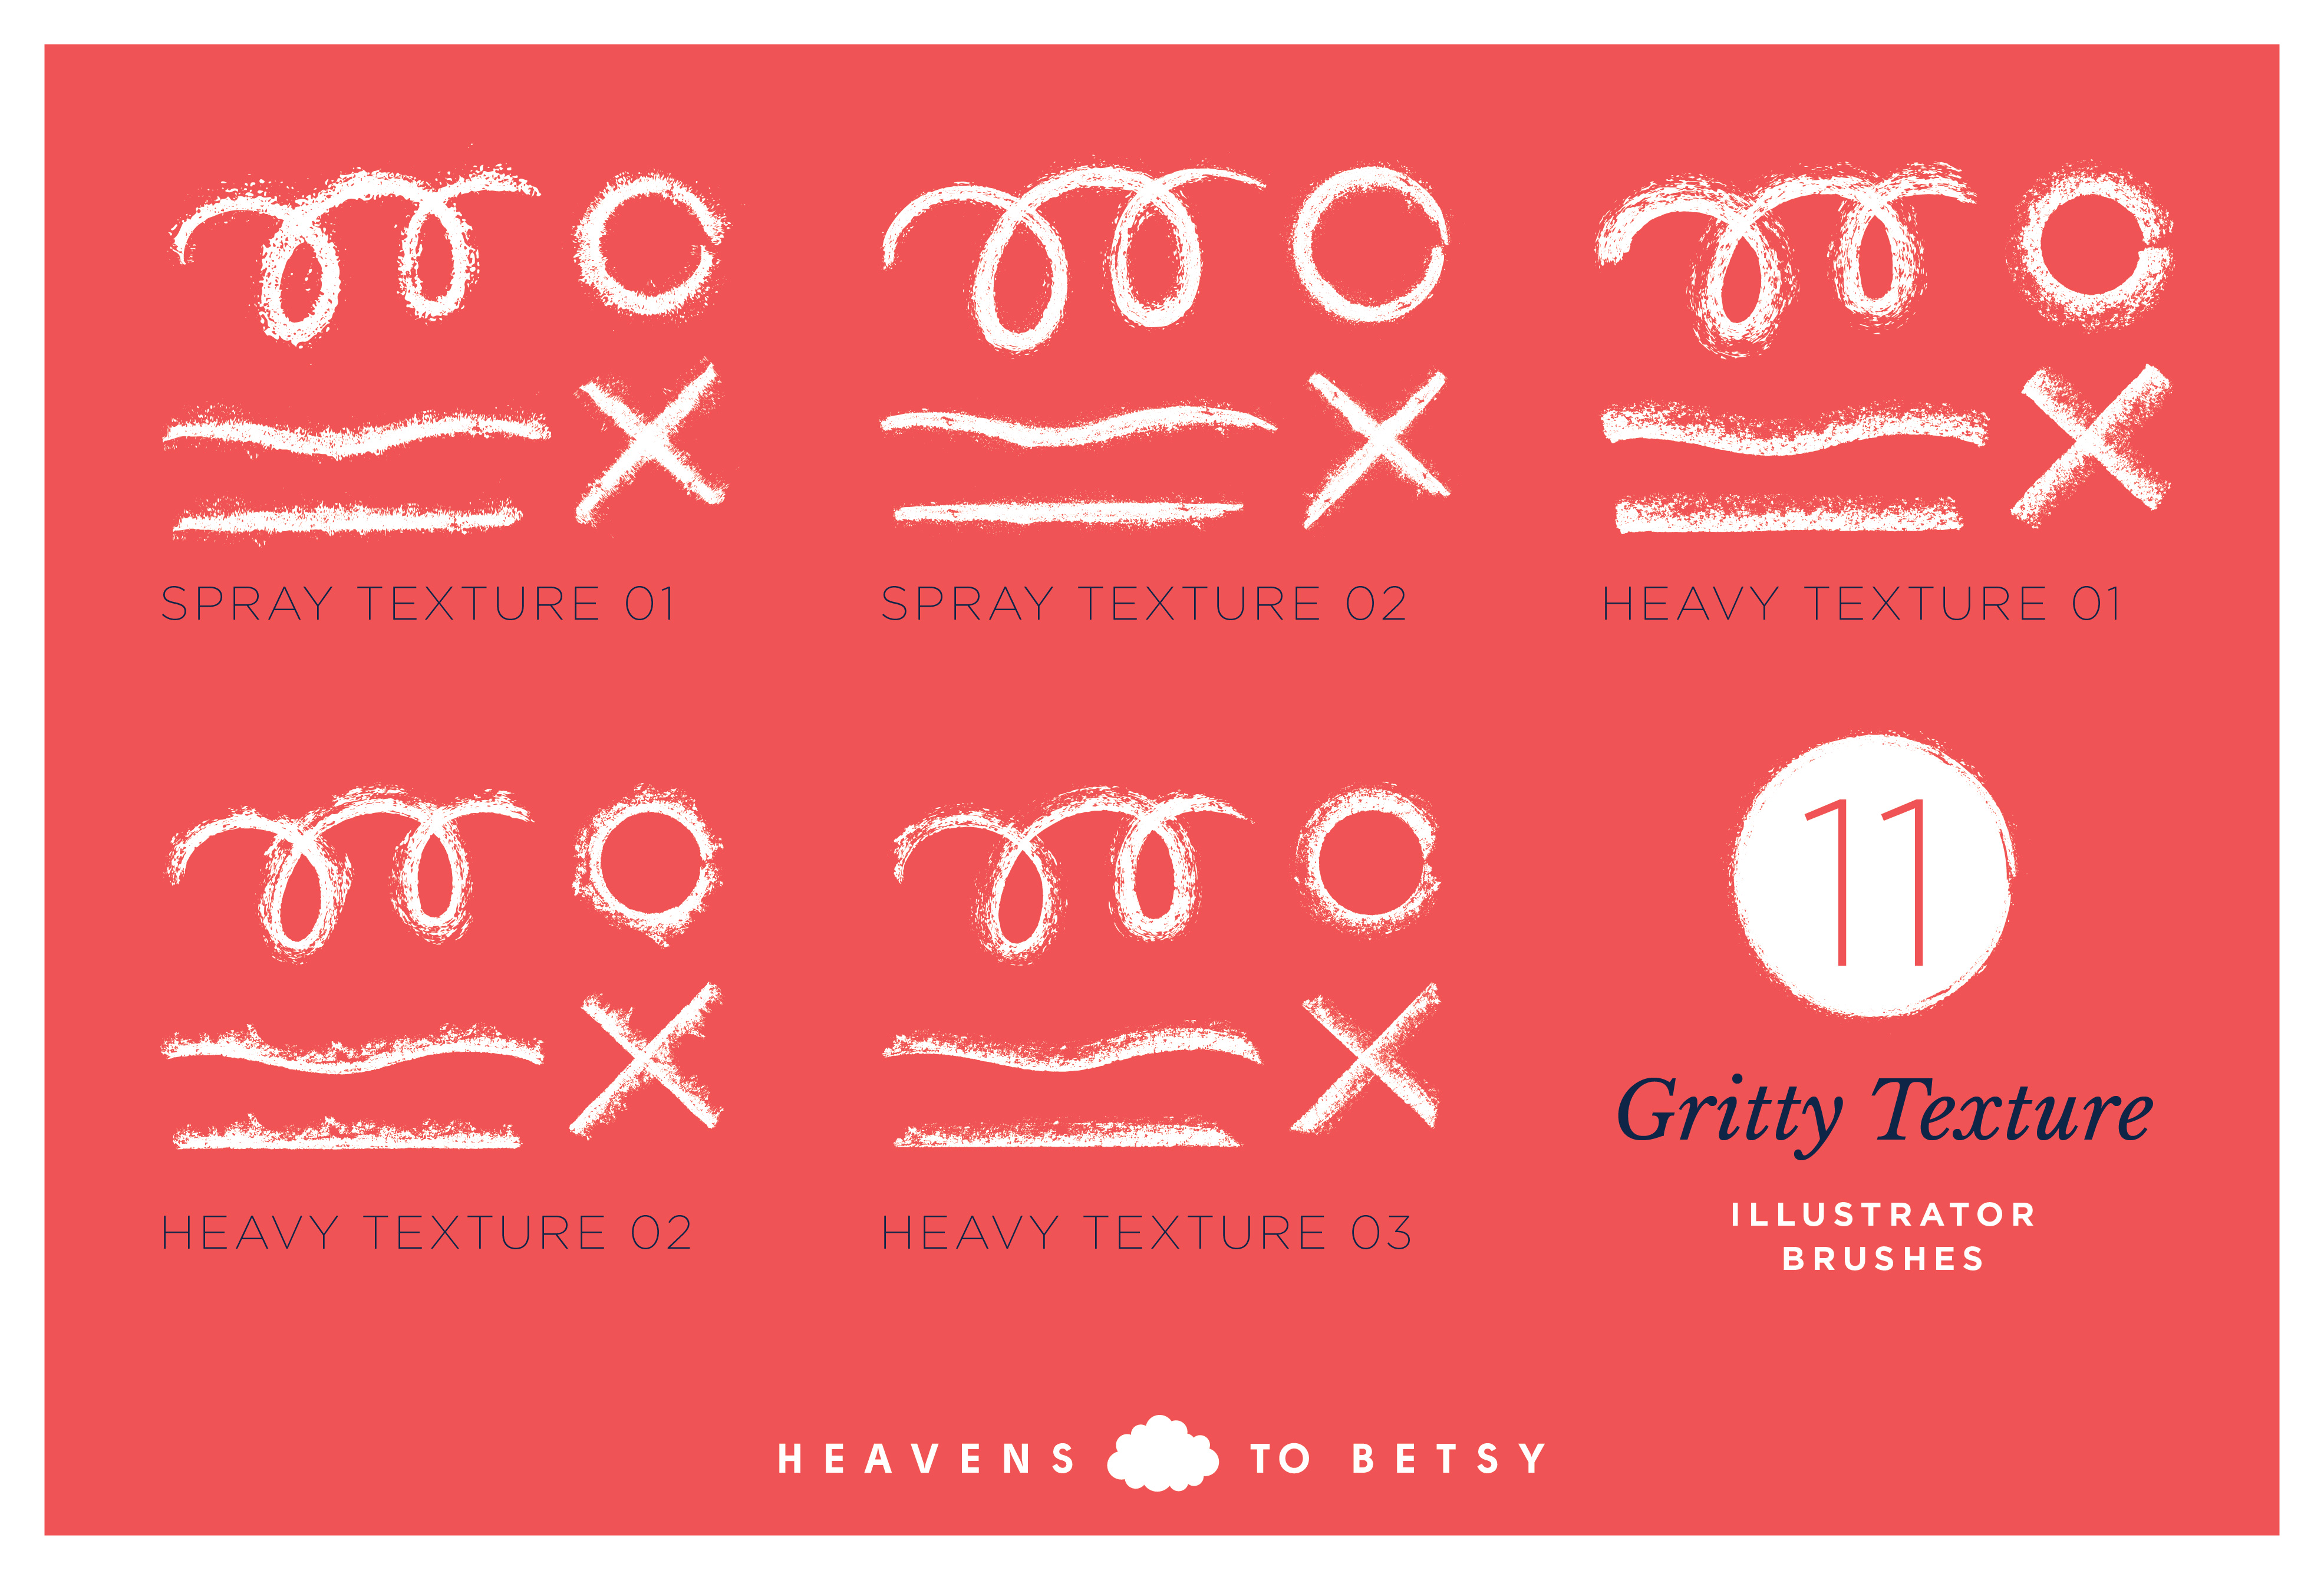 Hand crafted, gritty, speckled, grungy texture vector brushes for Adobe Illustrator.